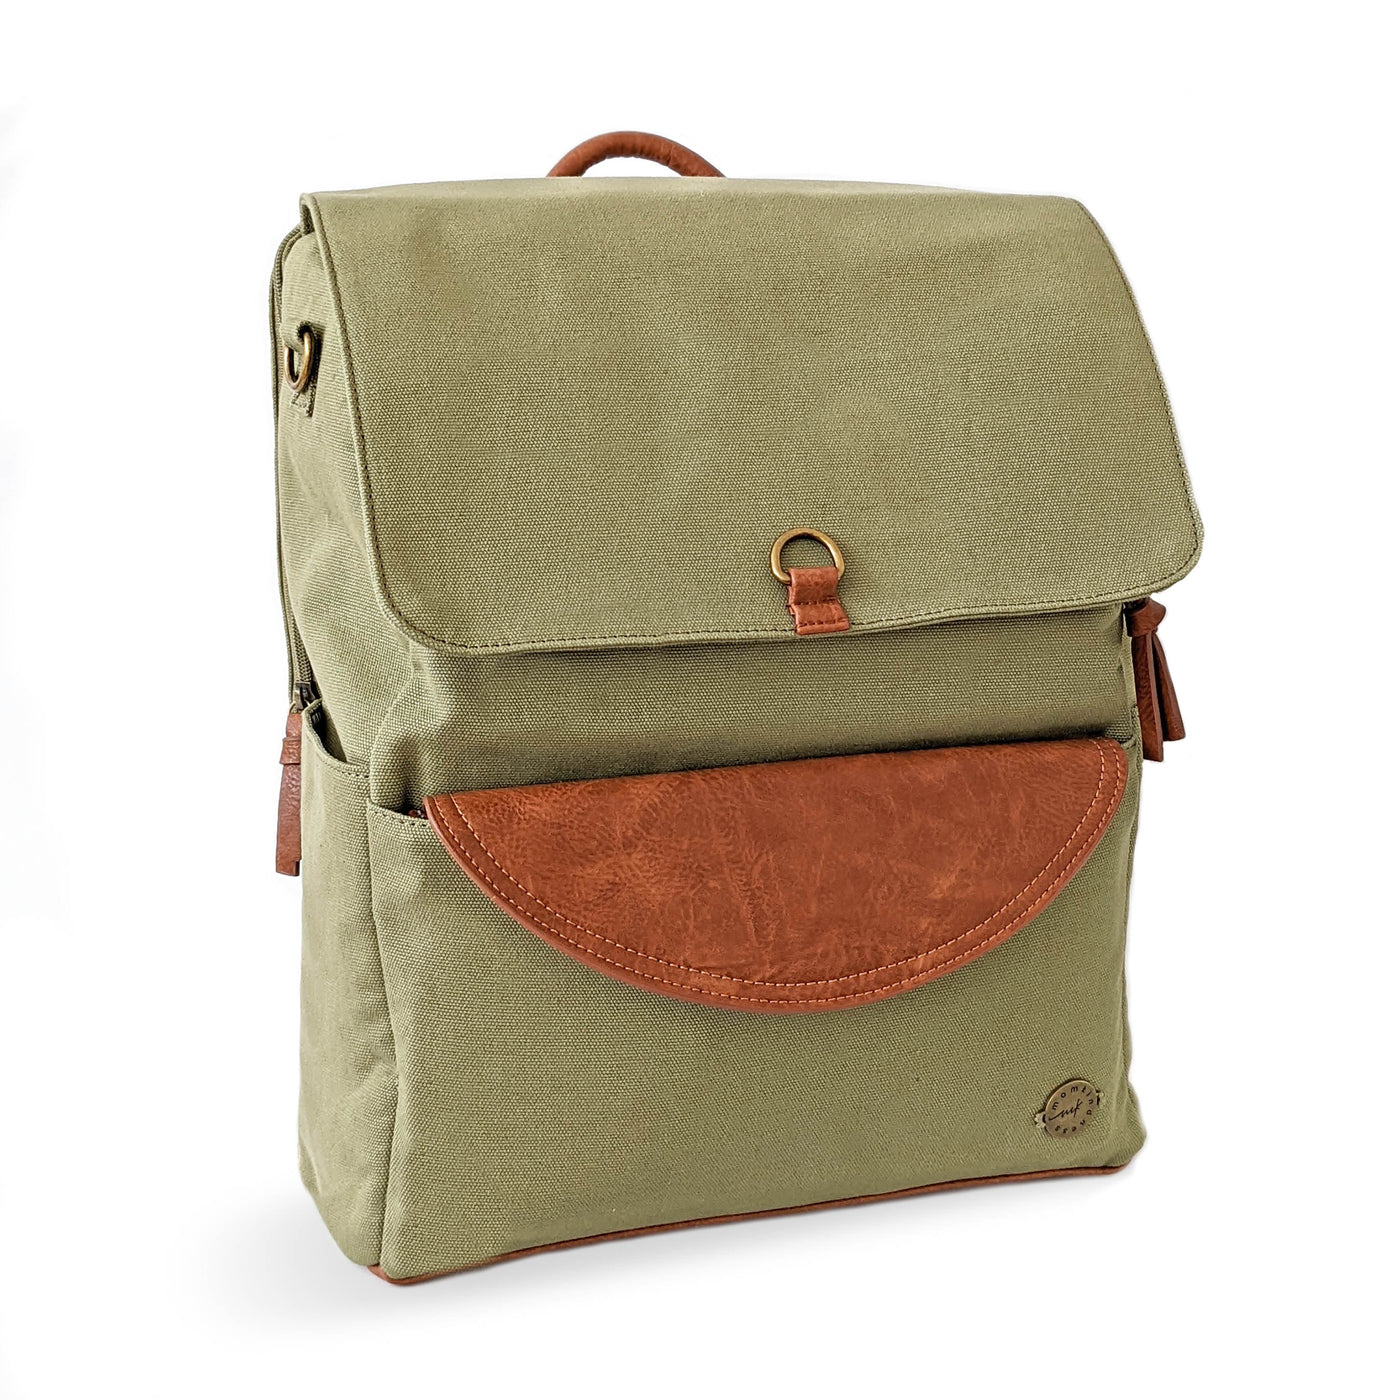 A laurel green colored canvas backpack with caramel brown vegan leather accents, shown in a 3/4 front view on a white background.